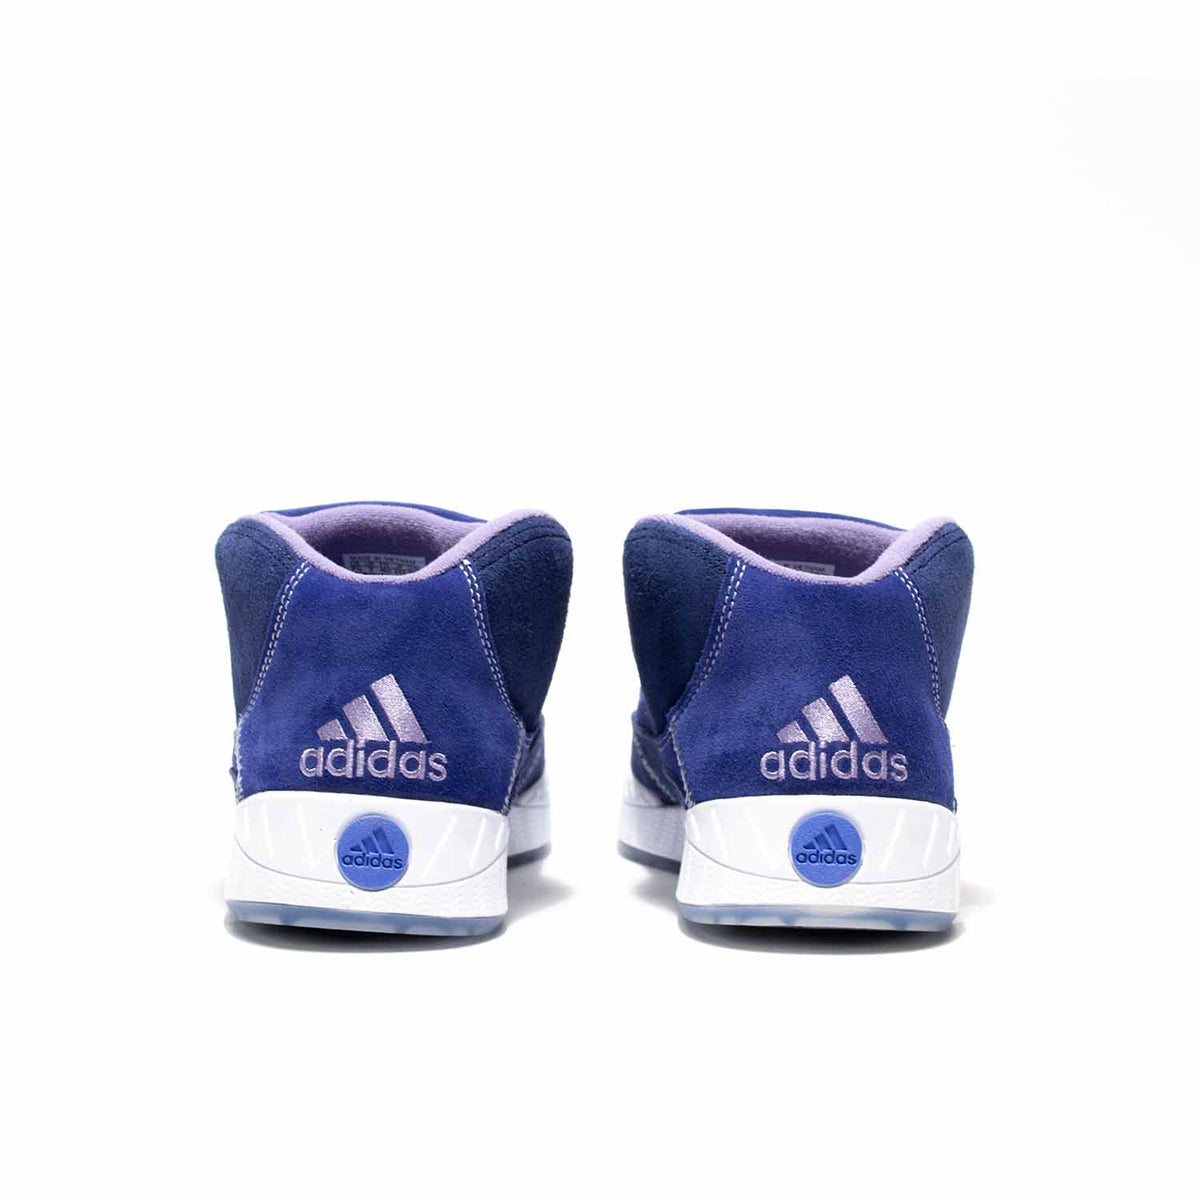 Adidas Adimatic Mid Top x Maite Steenhoudt in Victory Blue color with purple stripes, adidas skateboarding